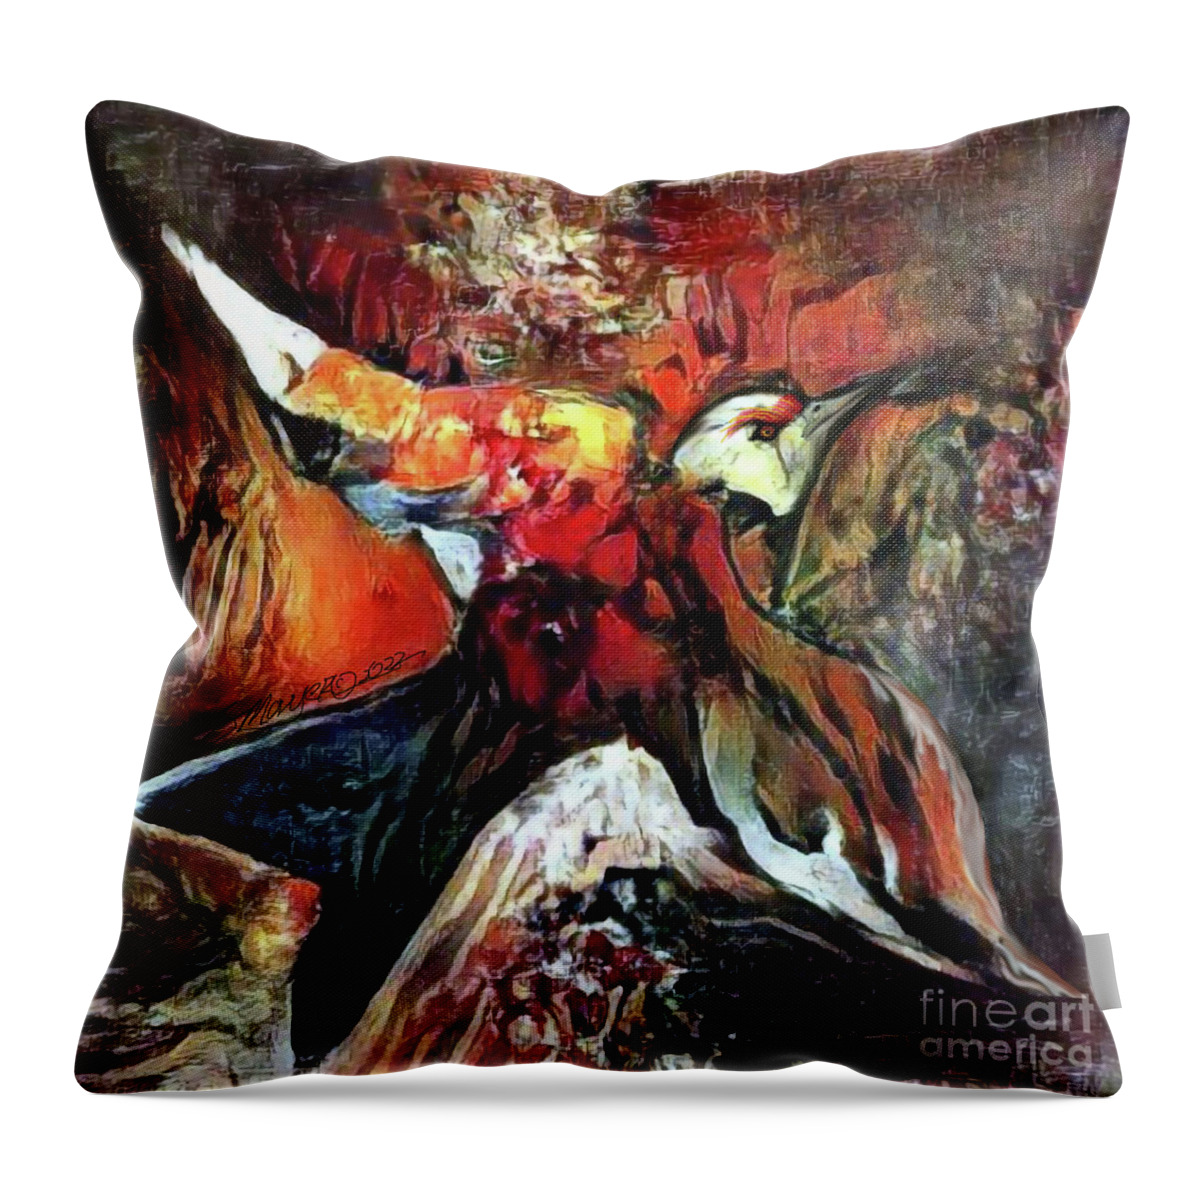 American Art Throw Pillow featuring the digital art Flying Solo 006 by Stacey Mayer by Stacey Mayer